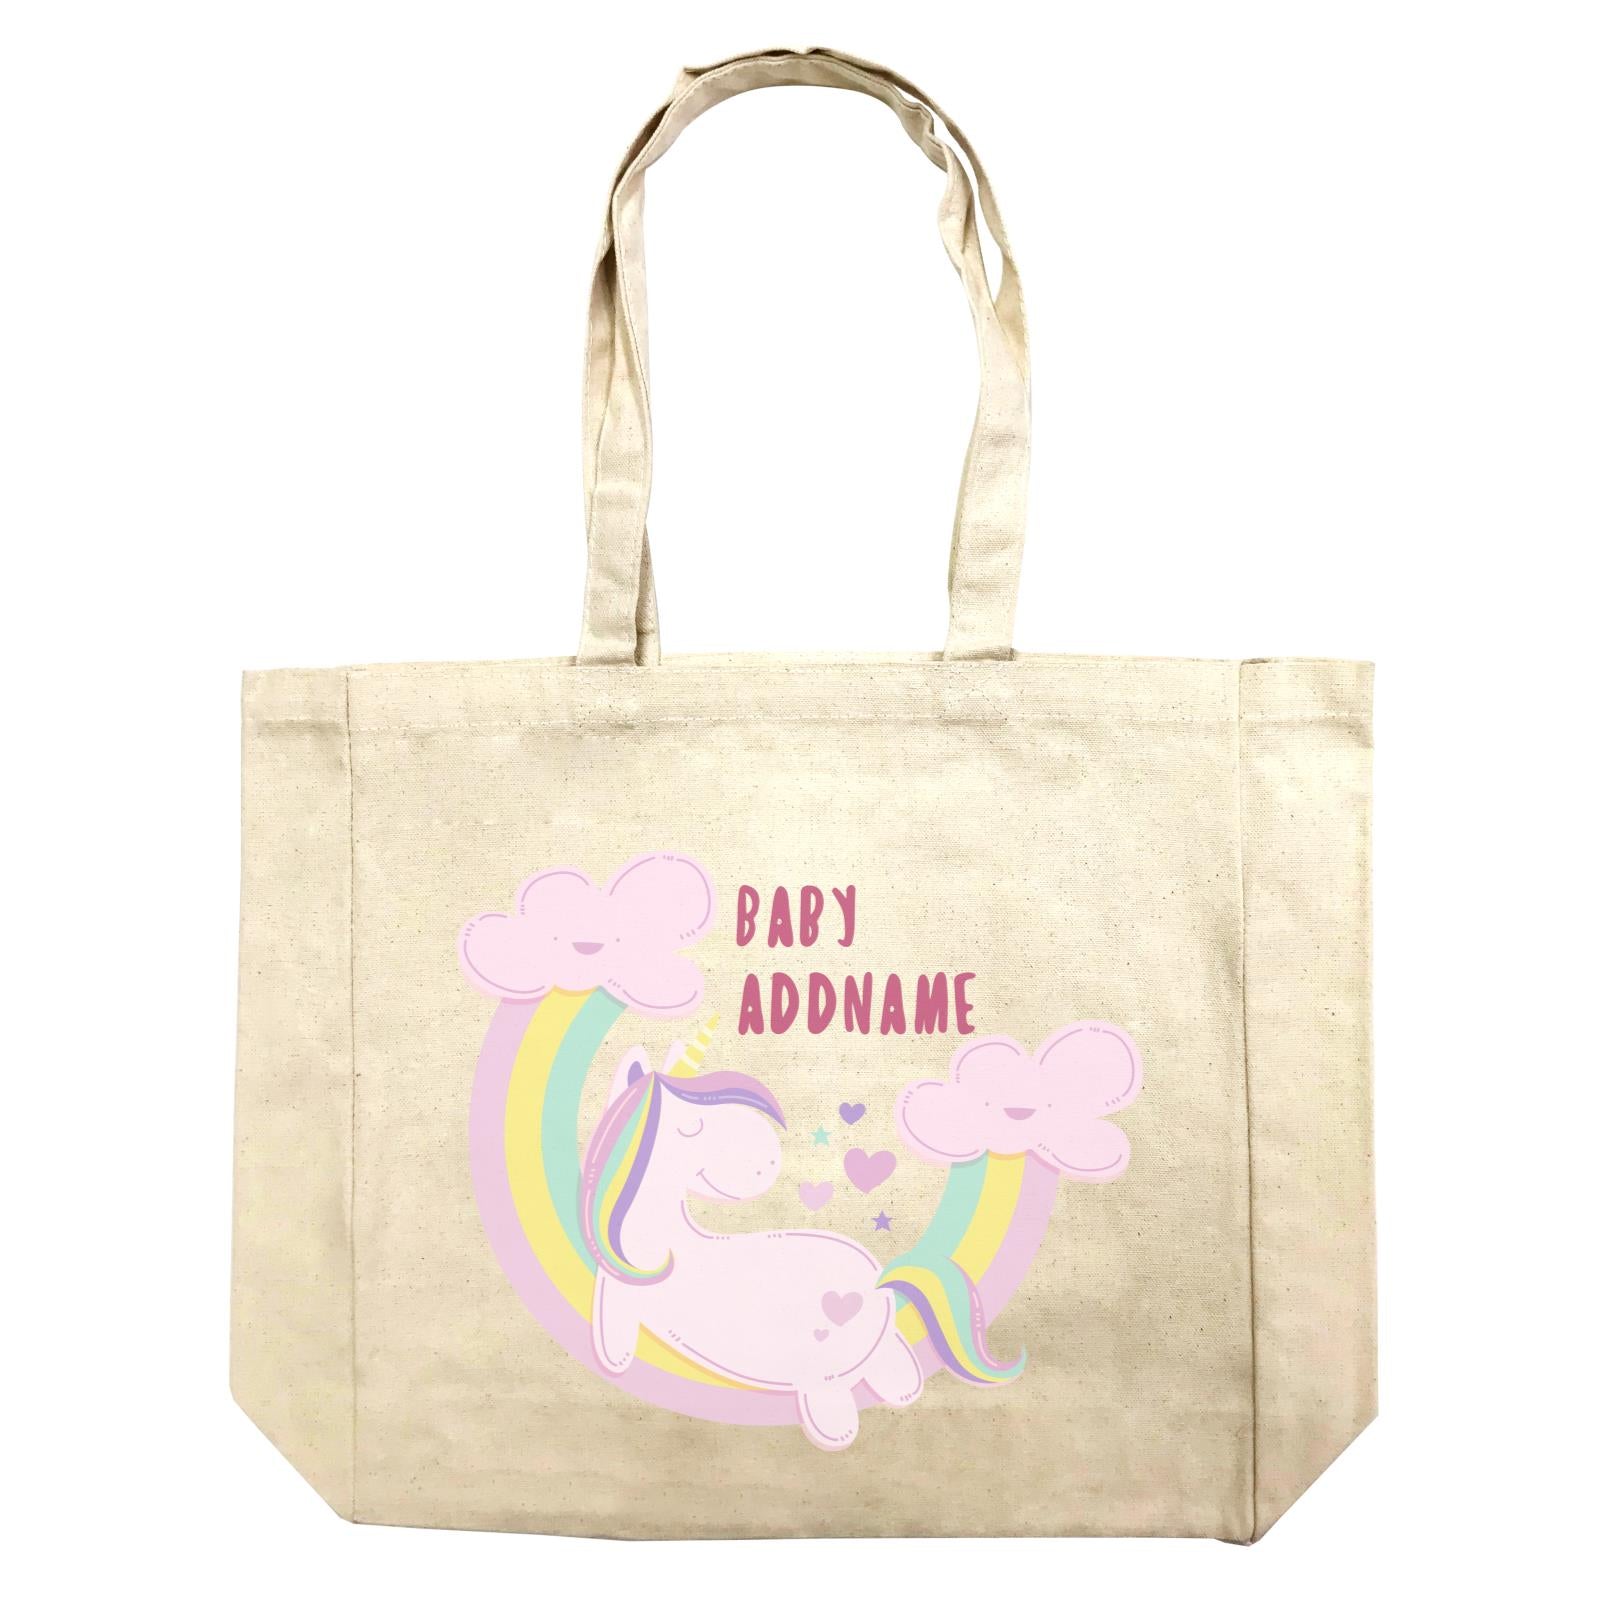 Pink Unicorn On Rainbow with Baby Addname Shopping Bag